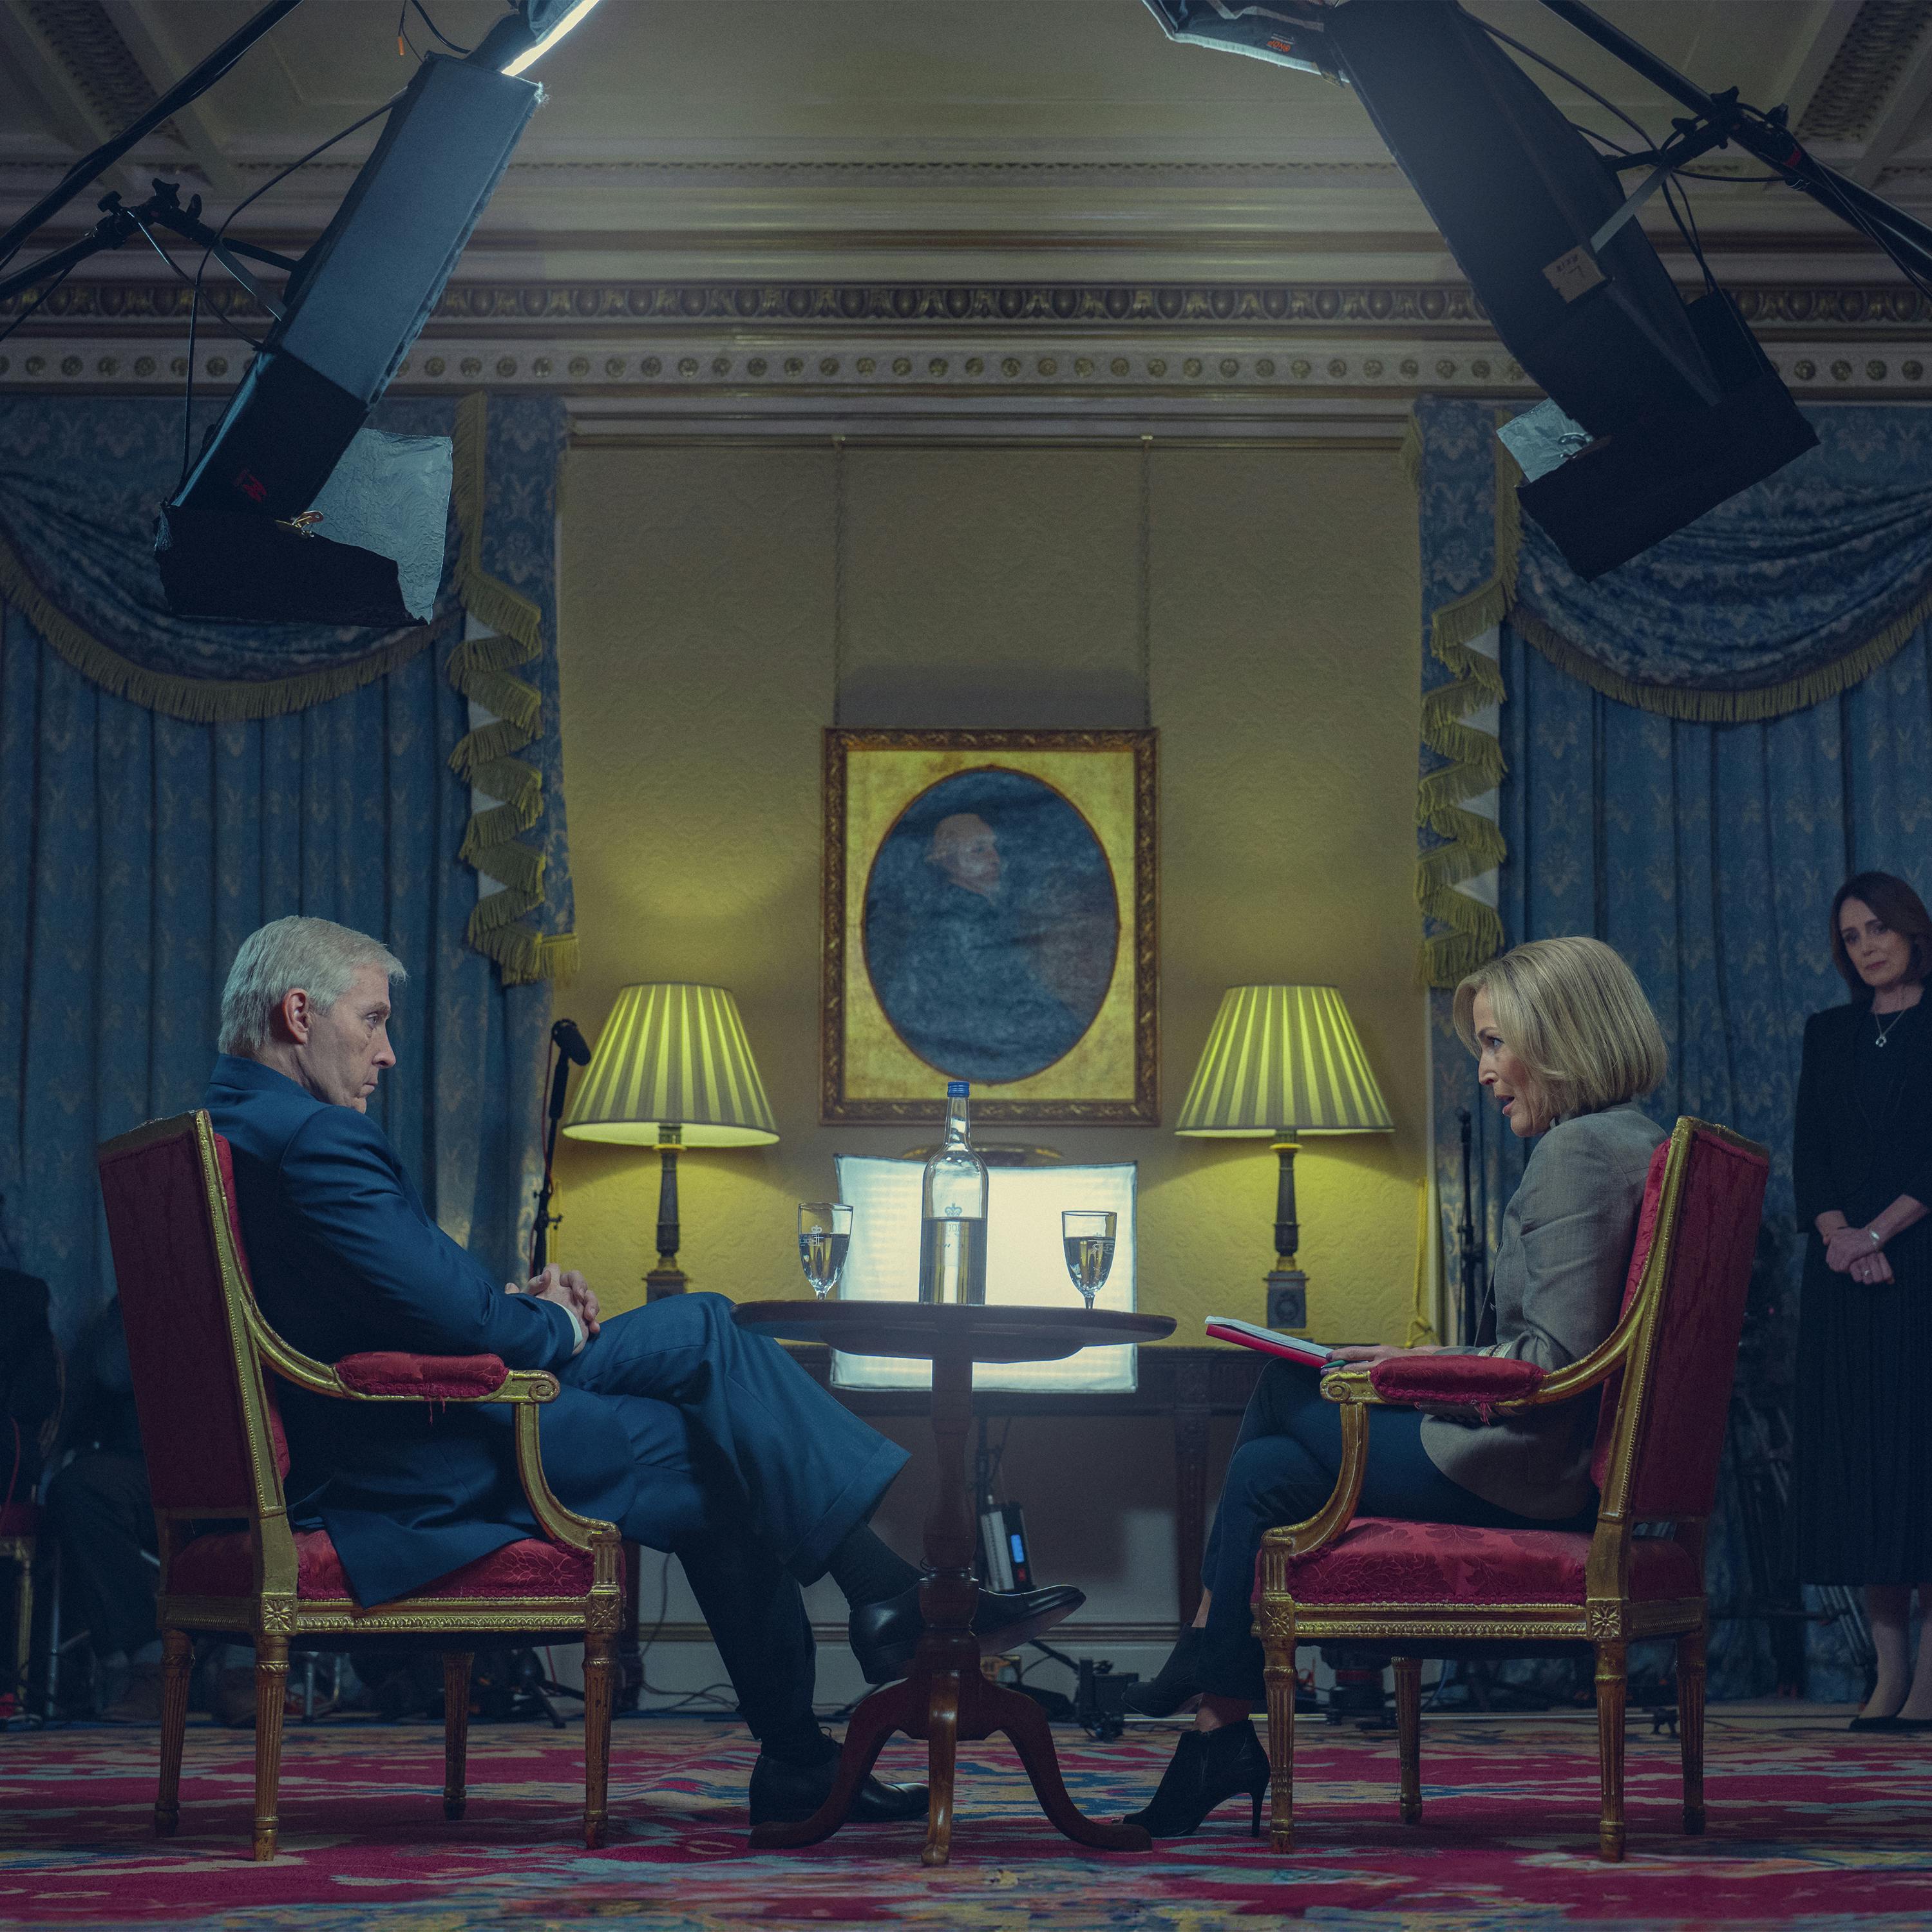 Prince Andrew (Rufus Sewell) and Emily Maitlis (Gillian Anderson) face off in a royal-looking room.